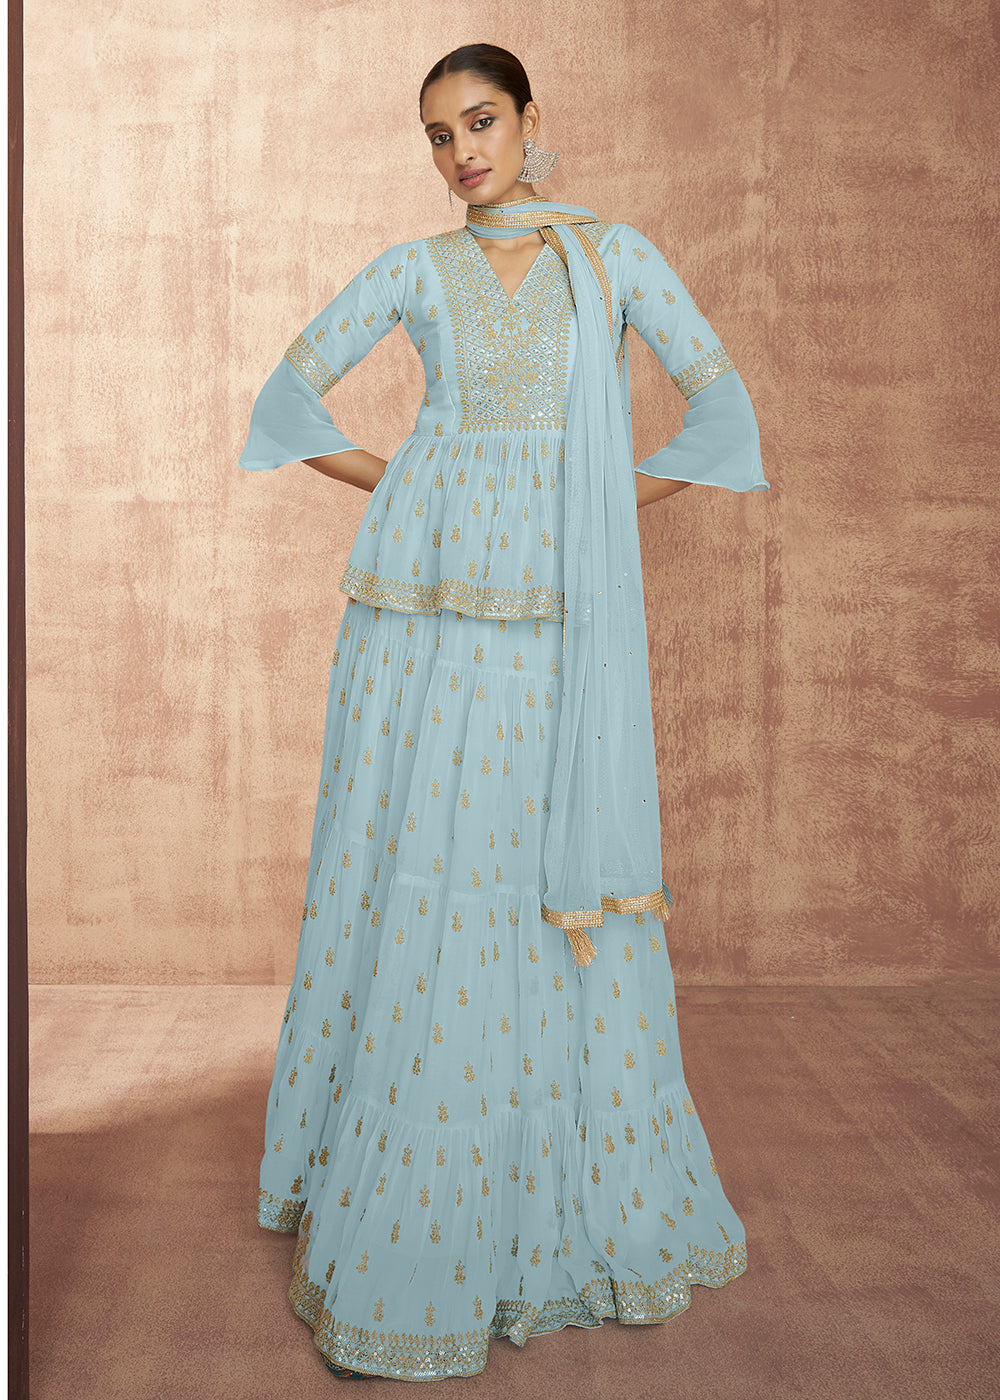 Shop Now Sky Blue Georgette Party Trendy Peplum Lehenga Choli with Jacket Online in USA, UK, Canada & Worldwide at Empress Clothing.